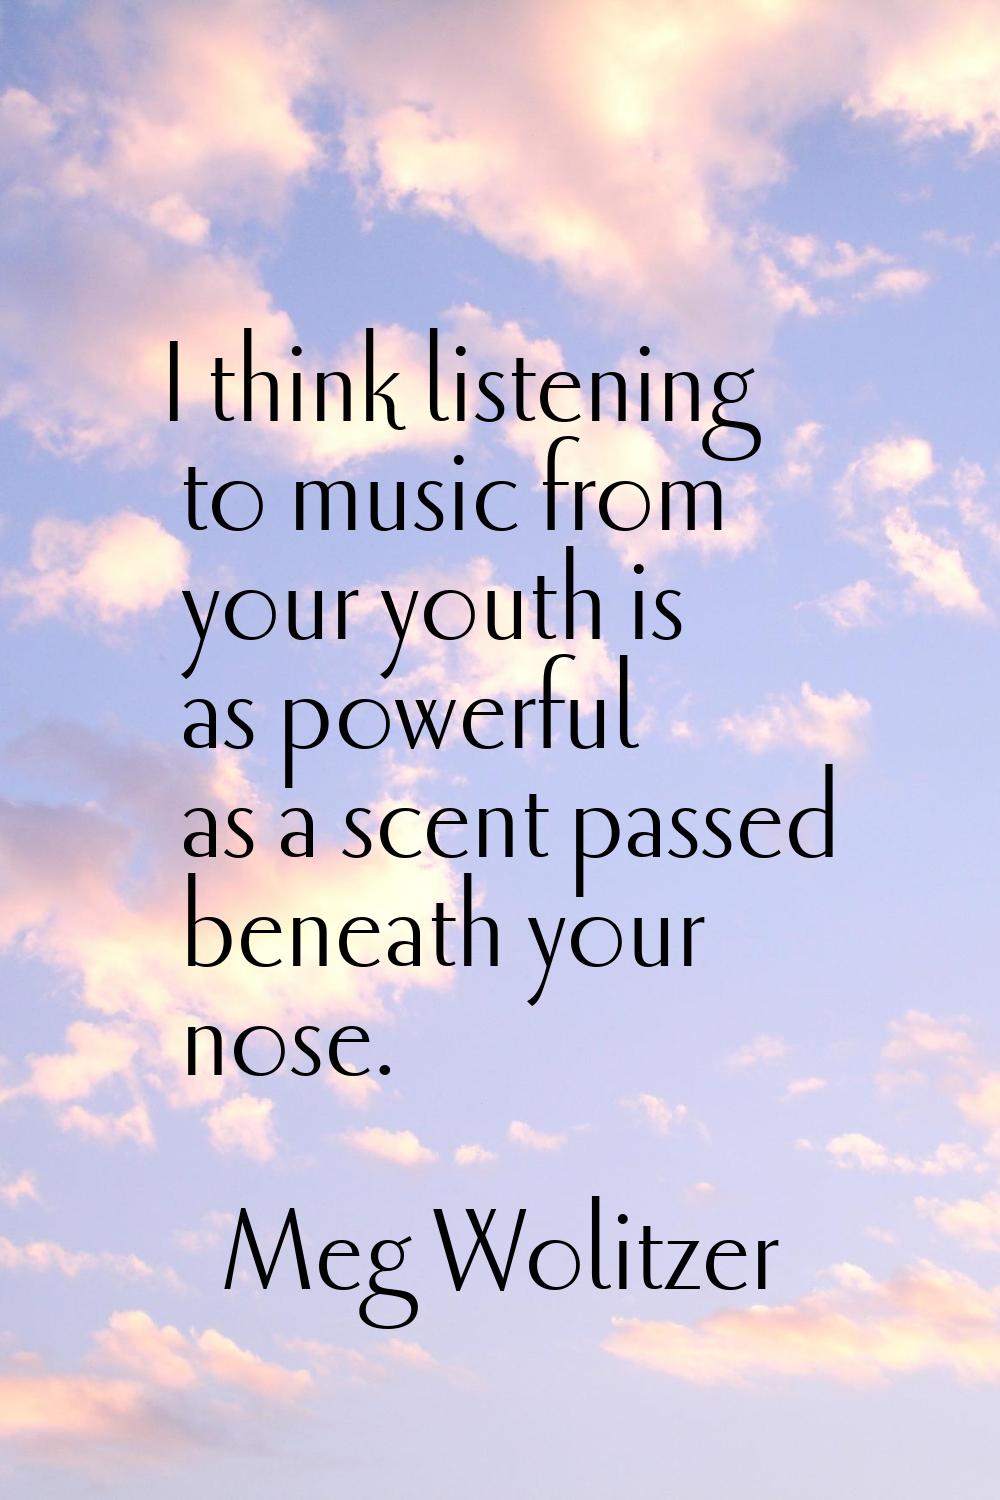 I think listening to music from your youth is as powerful as a scent passed beneath your nose.